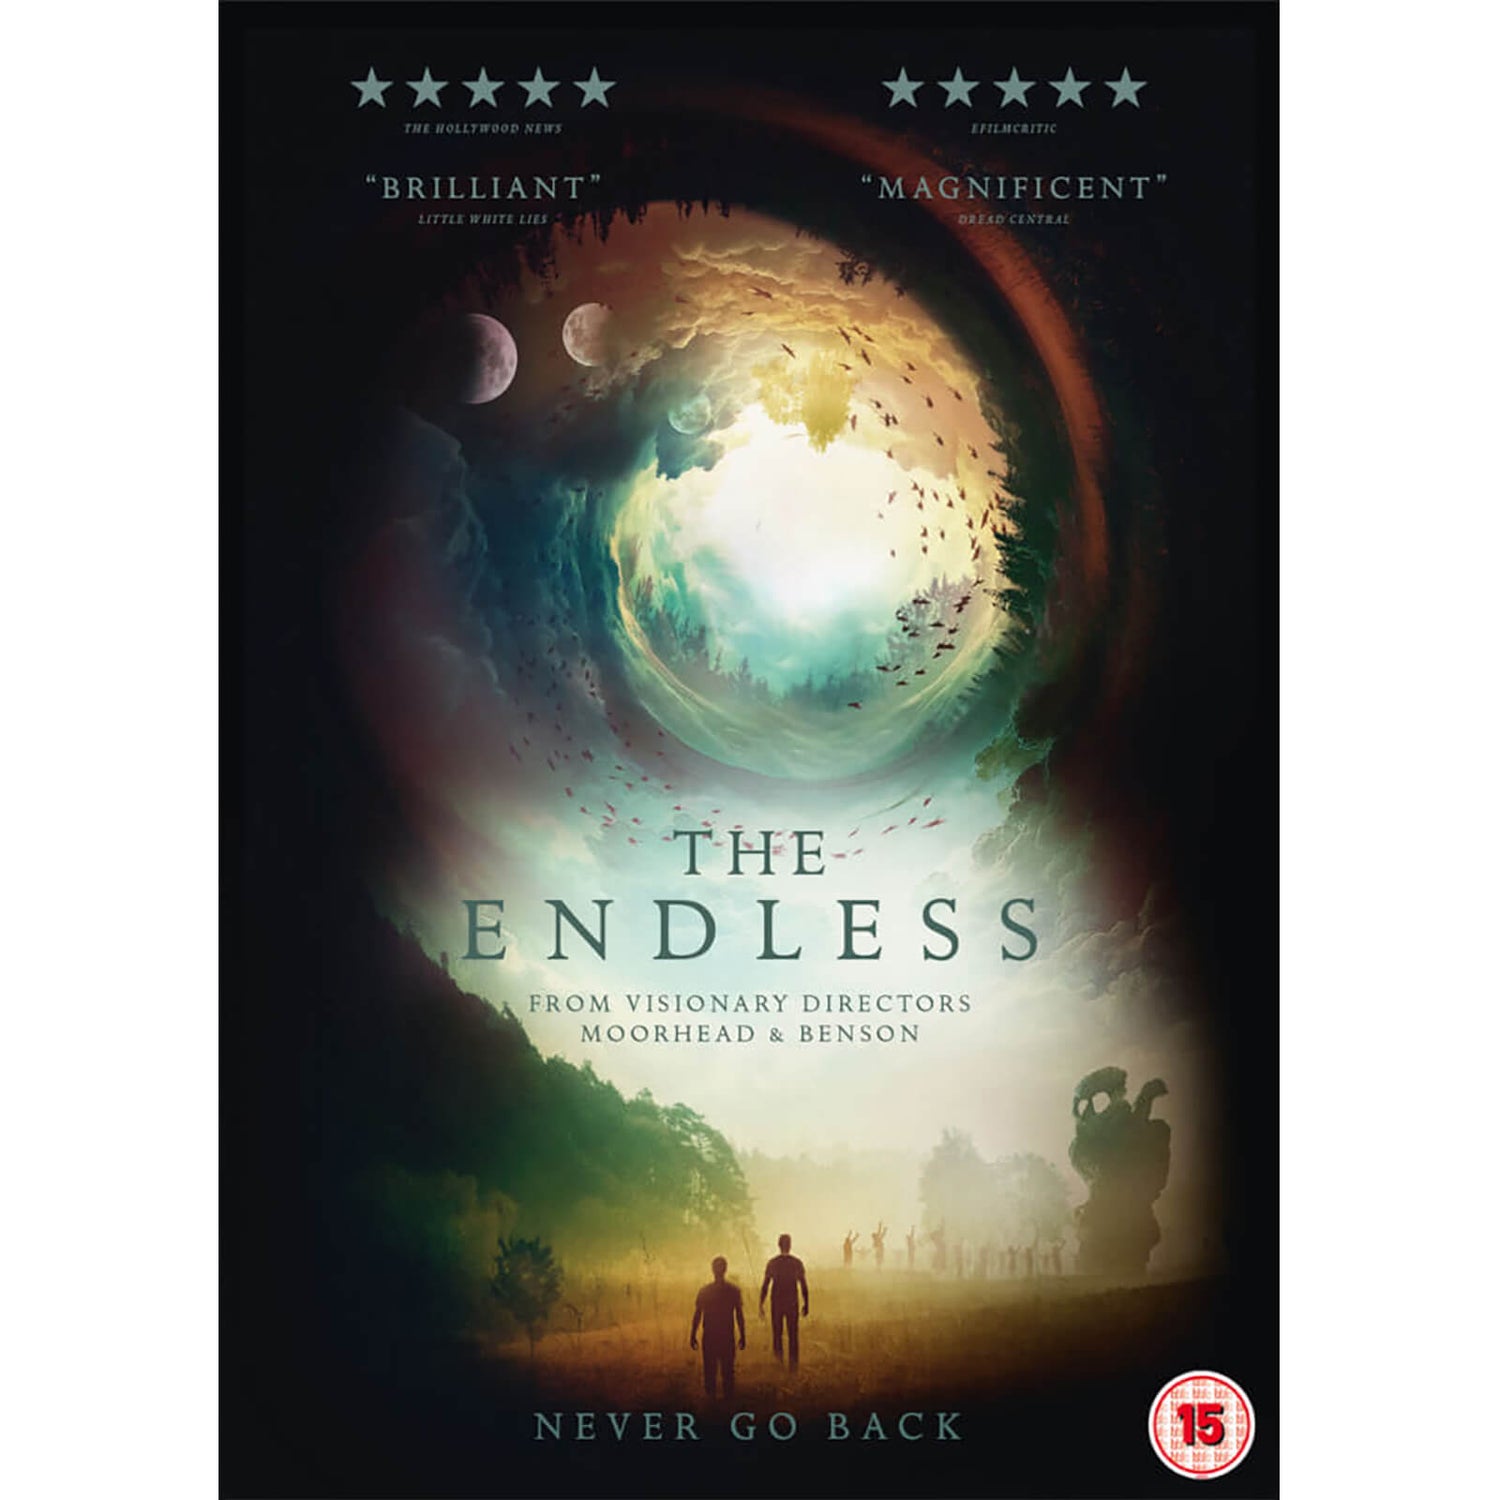 The Endless DVD